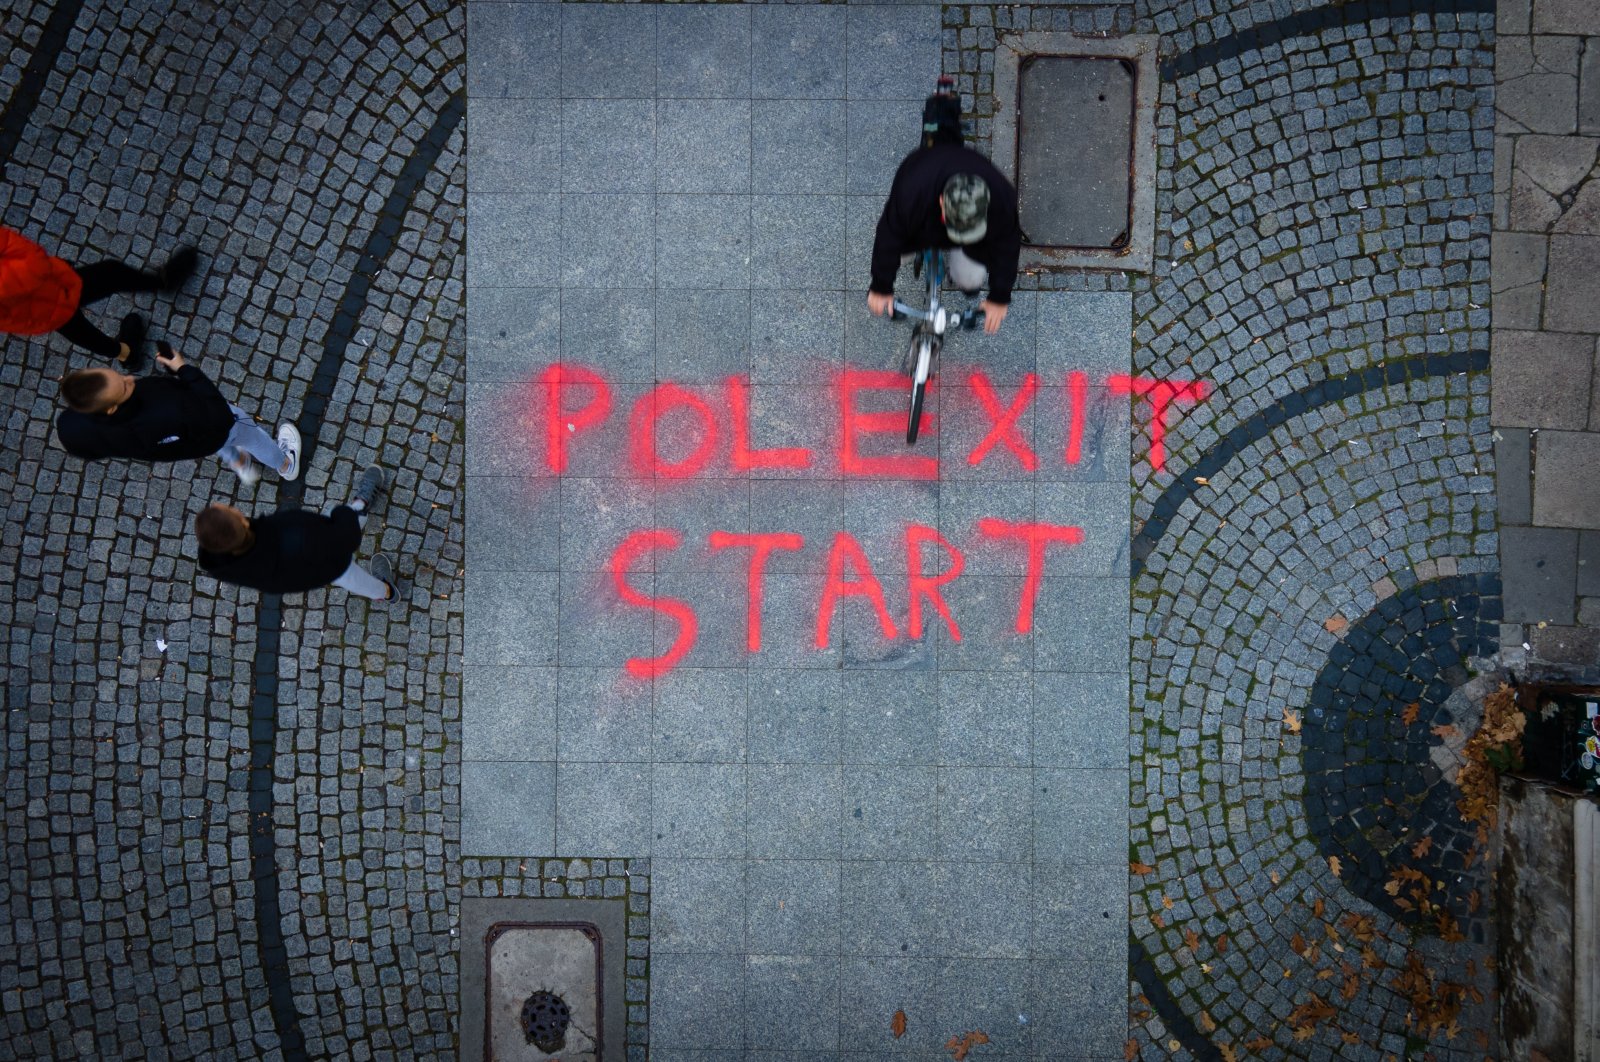 Graffiti reading "Polexit start" is seen in central Warsaw, Poland, Oct. 9, 2021. (Reuters Photo)